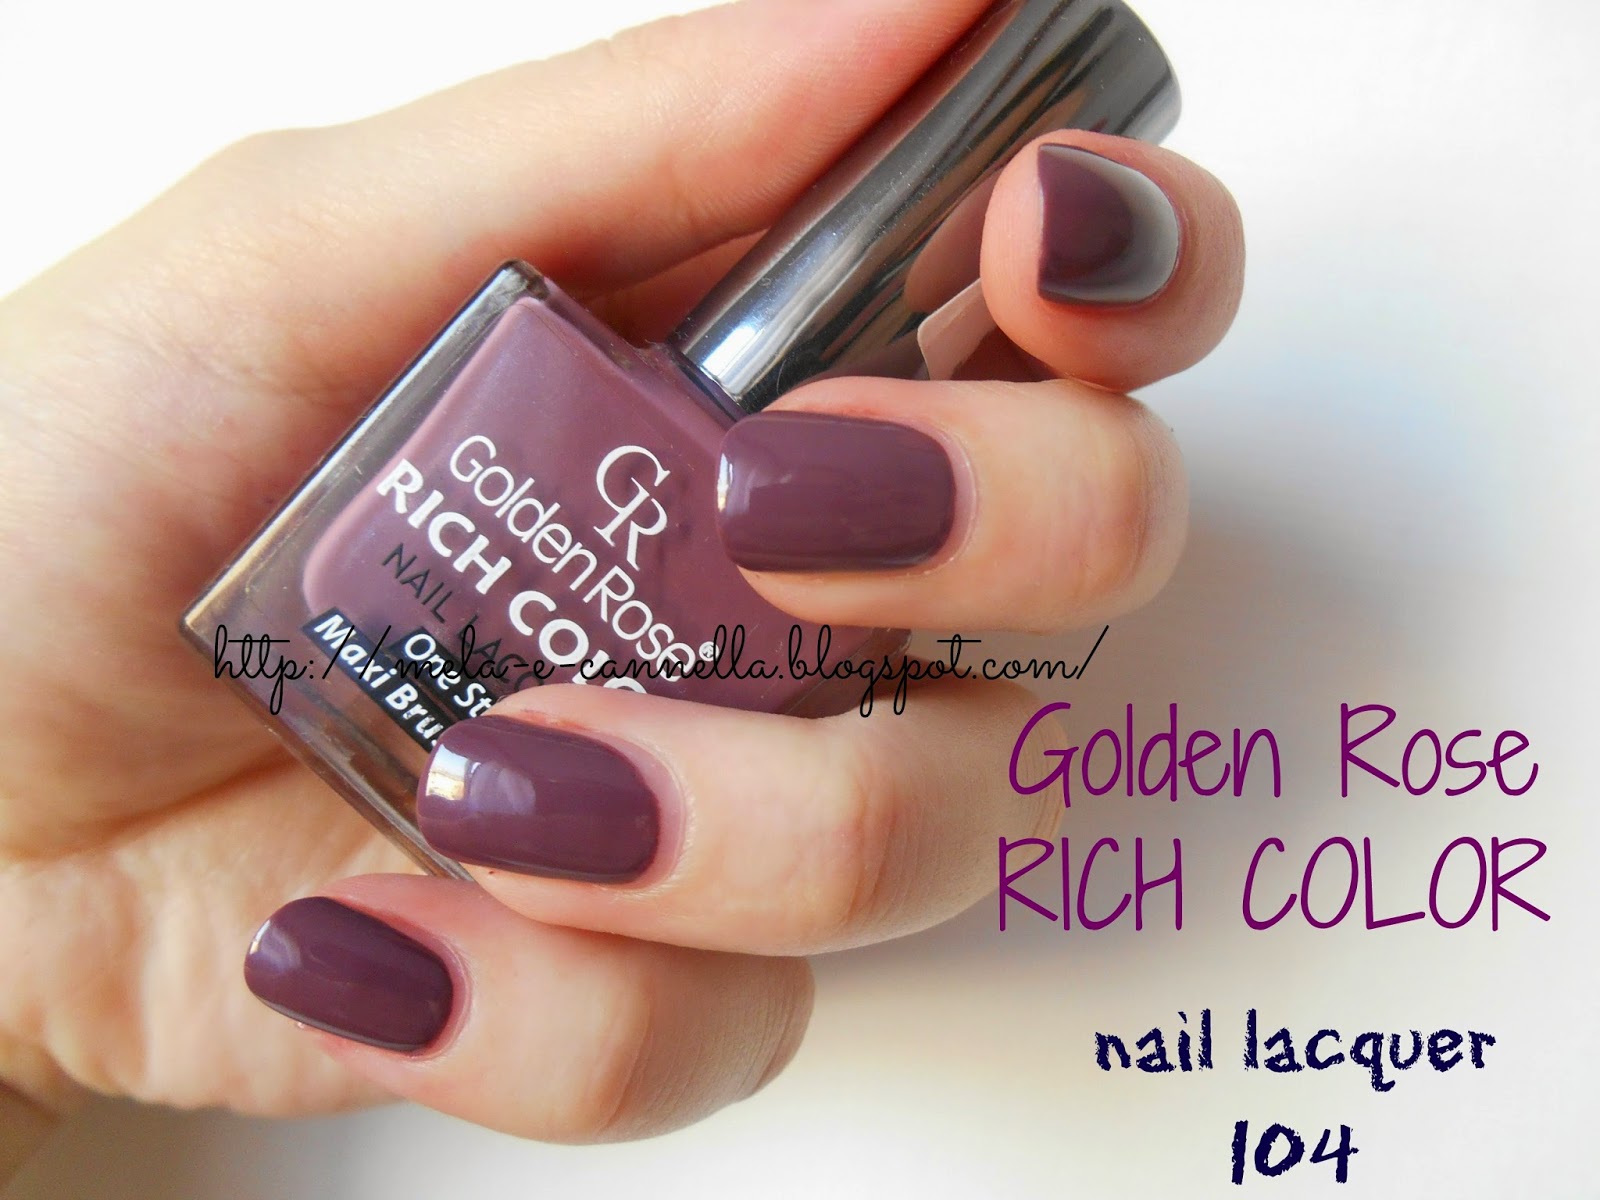 Golden Rose City Color Nail Lacquer - wide 6